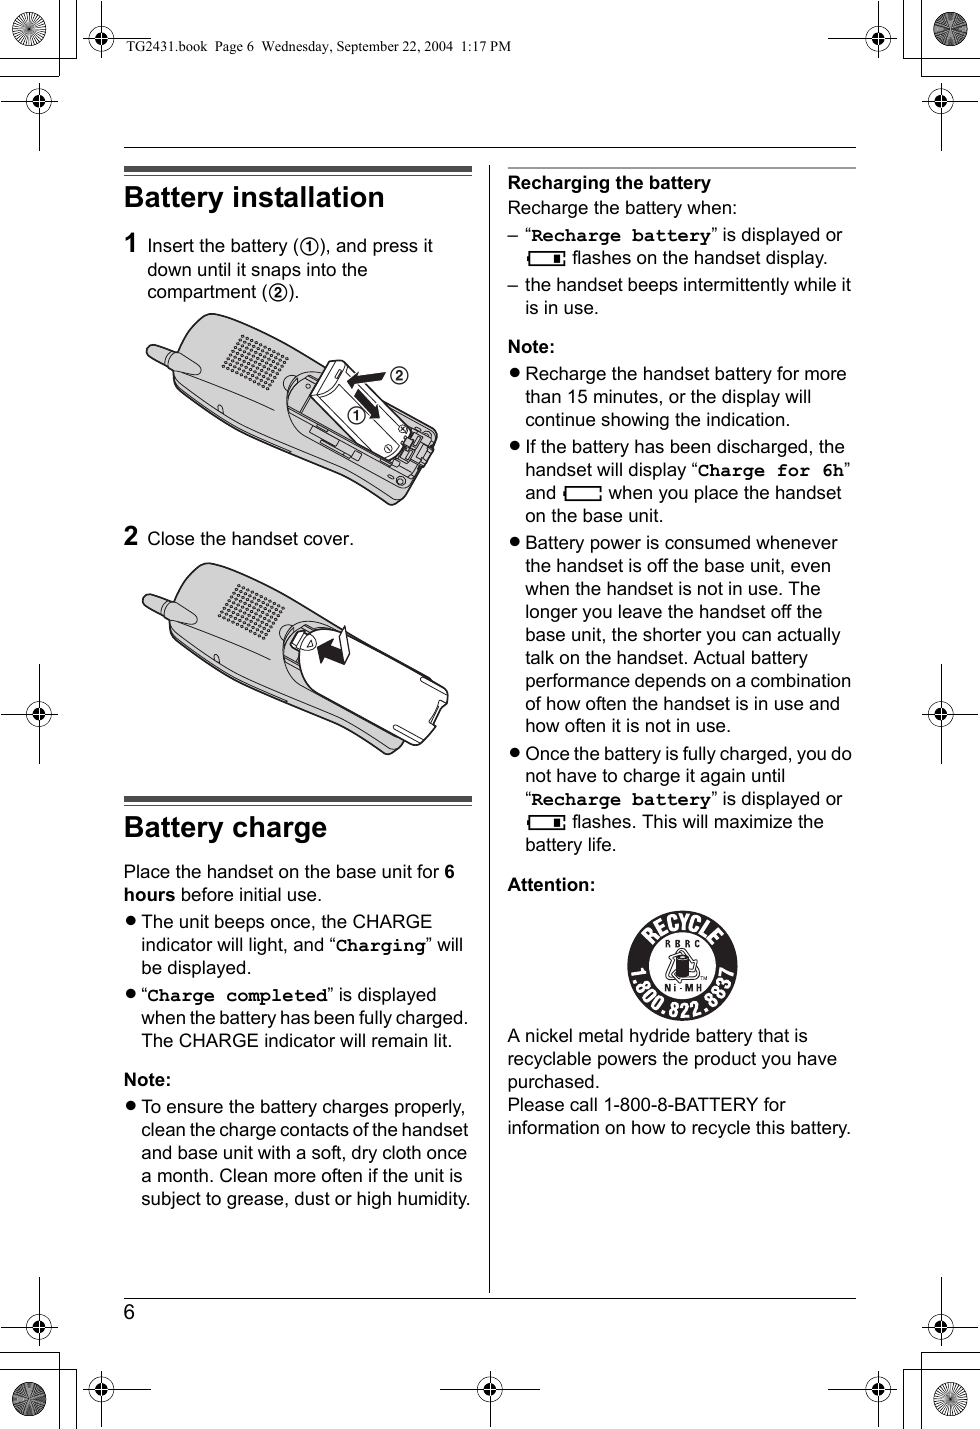 6Battery installation1Insert the battery (1), and press it down until it snaps into the compartment (2).2Close the handset cover.Battery chargePlace the handset on the base unit for 6 hours before initial use.LThe unit beeps once, the CHARGE indicator will light, and “Charging” will be displayed.L“Charge completed” is displayed when the battery has been fully charged. The CHARGE indicator will remain lit.Note:LTo ensure the battery charges properly, clean the charge contacts of the handset and base unit with a soft, dry cloth once a month. Clean more often if the unit is subject to grease, dust or high humidity.Recharging the batteryRecharge the battery when:–“Recharge battery” is displayed or 7 flashes on the handset display.– the handset beeps intermittently while it is in use.Note:LRecharge the handset battery for more than 15 minutes, or the display will continue showing the indication.LIf the battery has been discharged, the handset will display “Charge for 6h” and 8 when you place the handset on the base unit.LBattery power is consumed whenever the handset is off the base unit, even when the handset is not in use. The longer you leave the handset off the base unit, the shorter you can actually talk on the handset. Actual battery performance depends on a combination of how often the handset is in use and how often it is not in use.LOnce the battery is fully charged, you do not have to charge it again until “Recharge battery” is displayed or 7 flashes. This will maximize the battery life.Attention:A nickel metal hydride battery that is recyclable powers the product you have purchased.Please call 1-800-8-BATTERY for information on how to recycle this battery.12TG2431.book  Page 6  Wednesday, September 22, 2004  1:17 PM